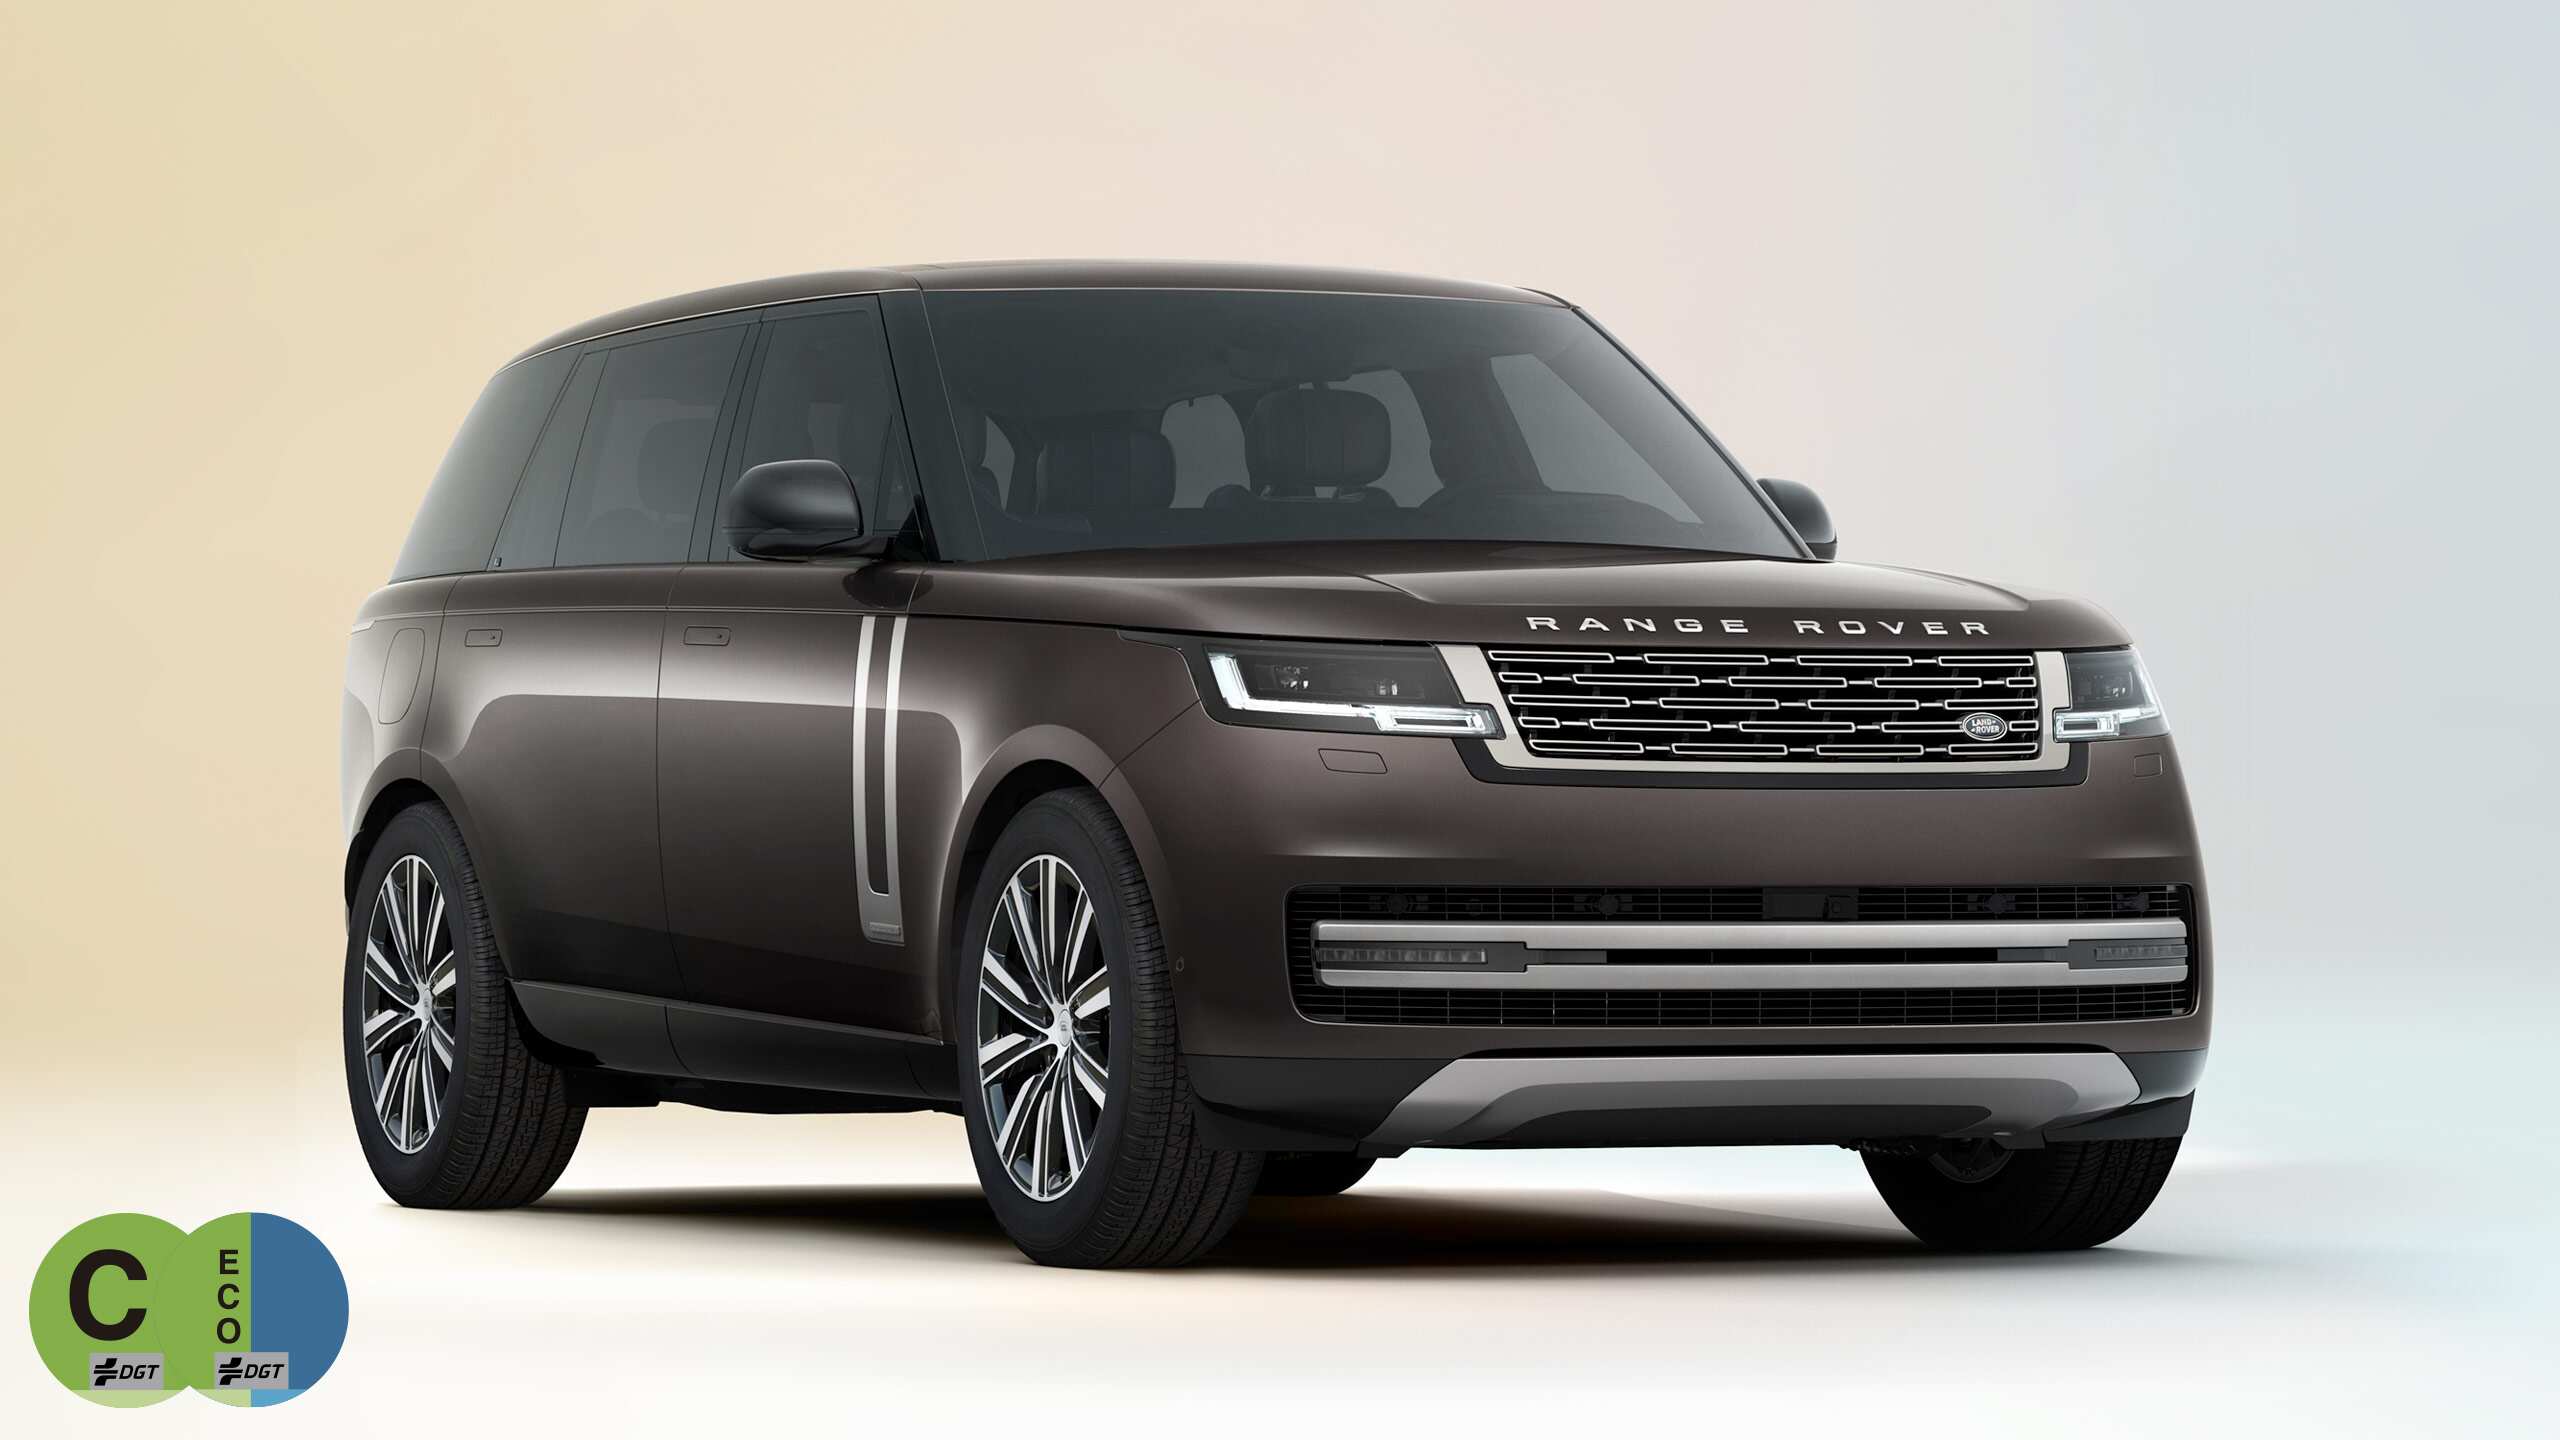 Front Right Profile representation of New Range Rover on gradient background